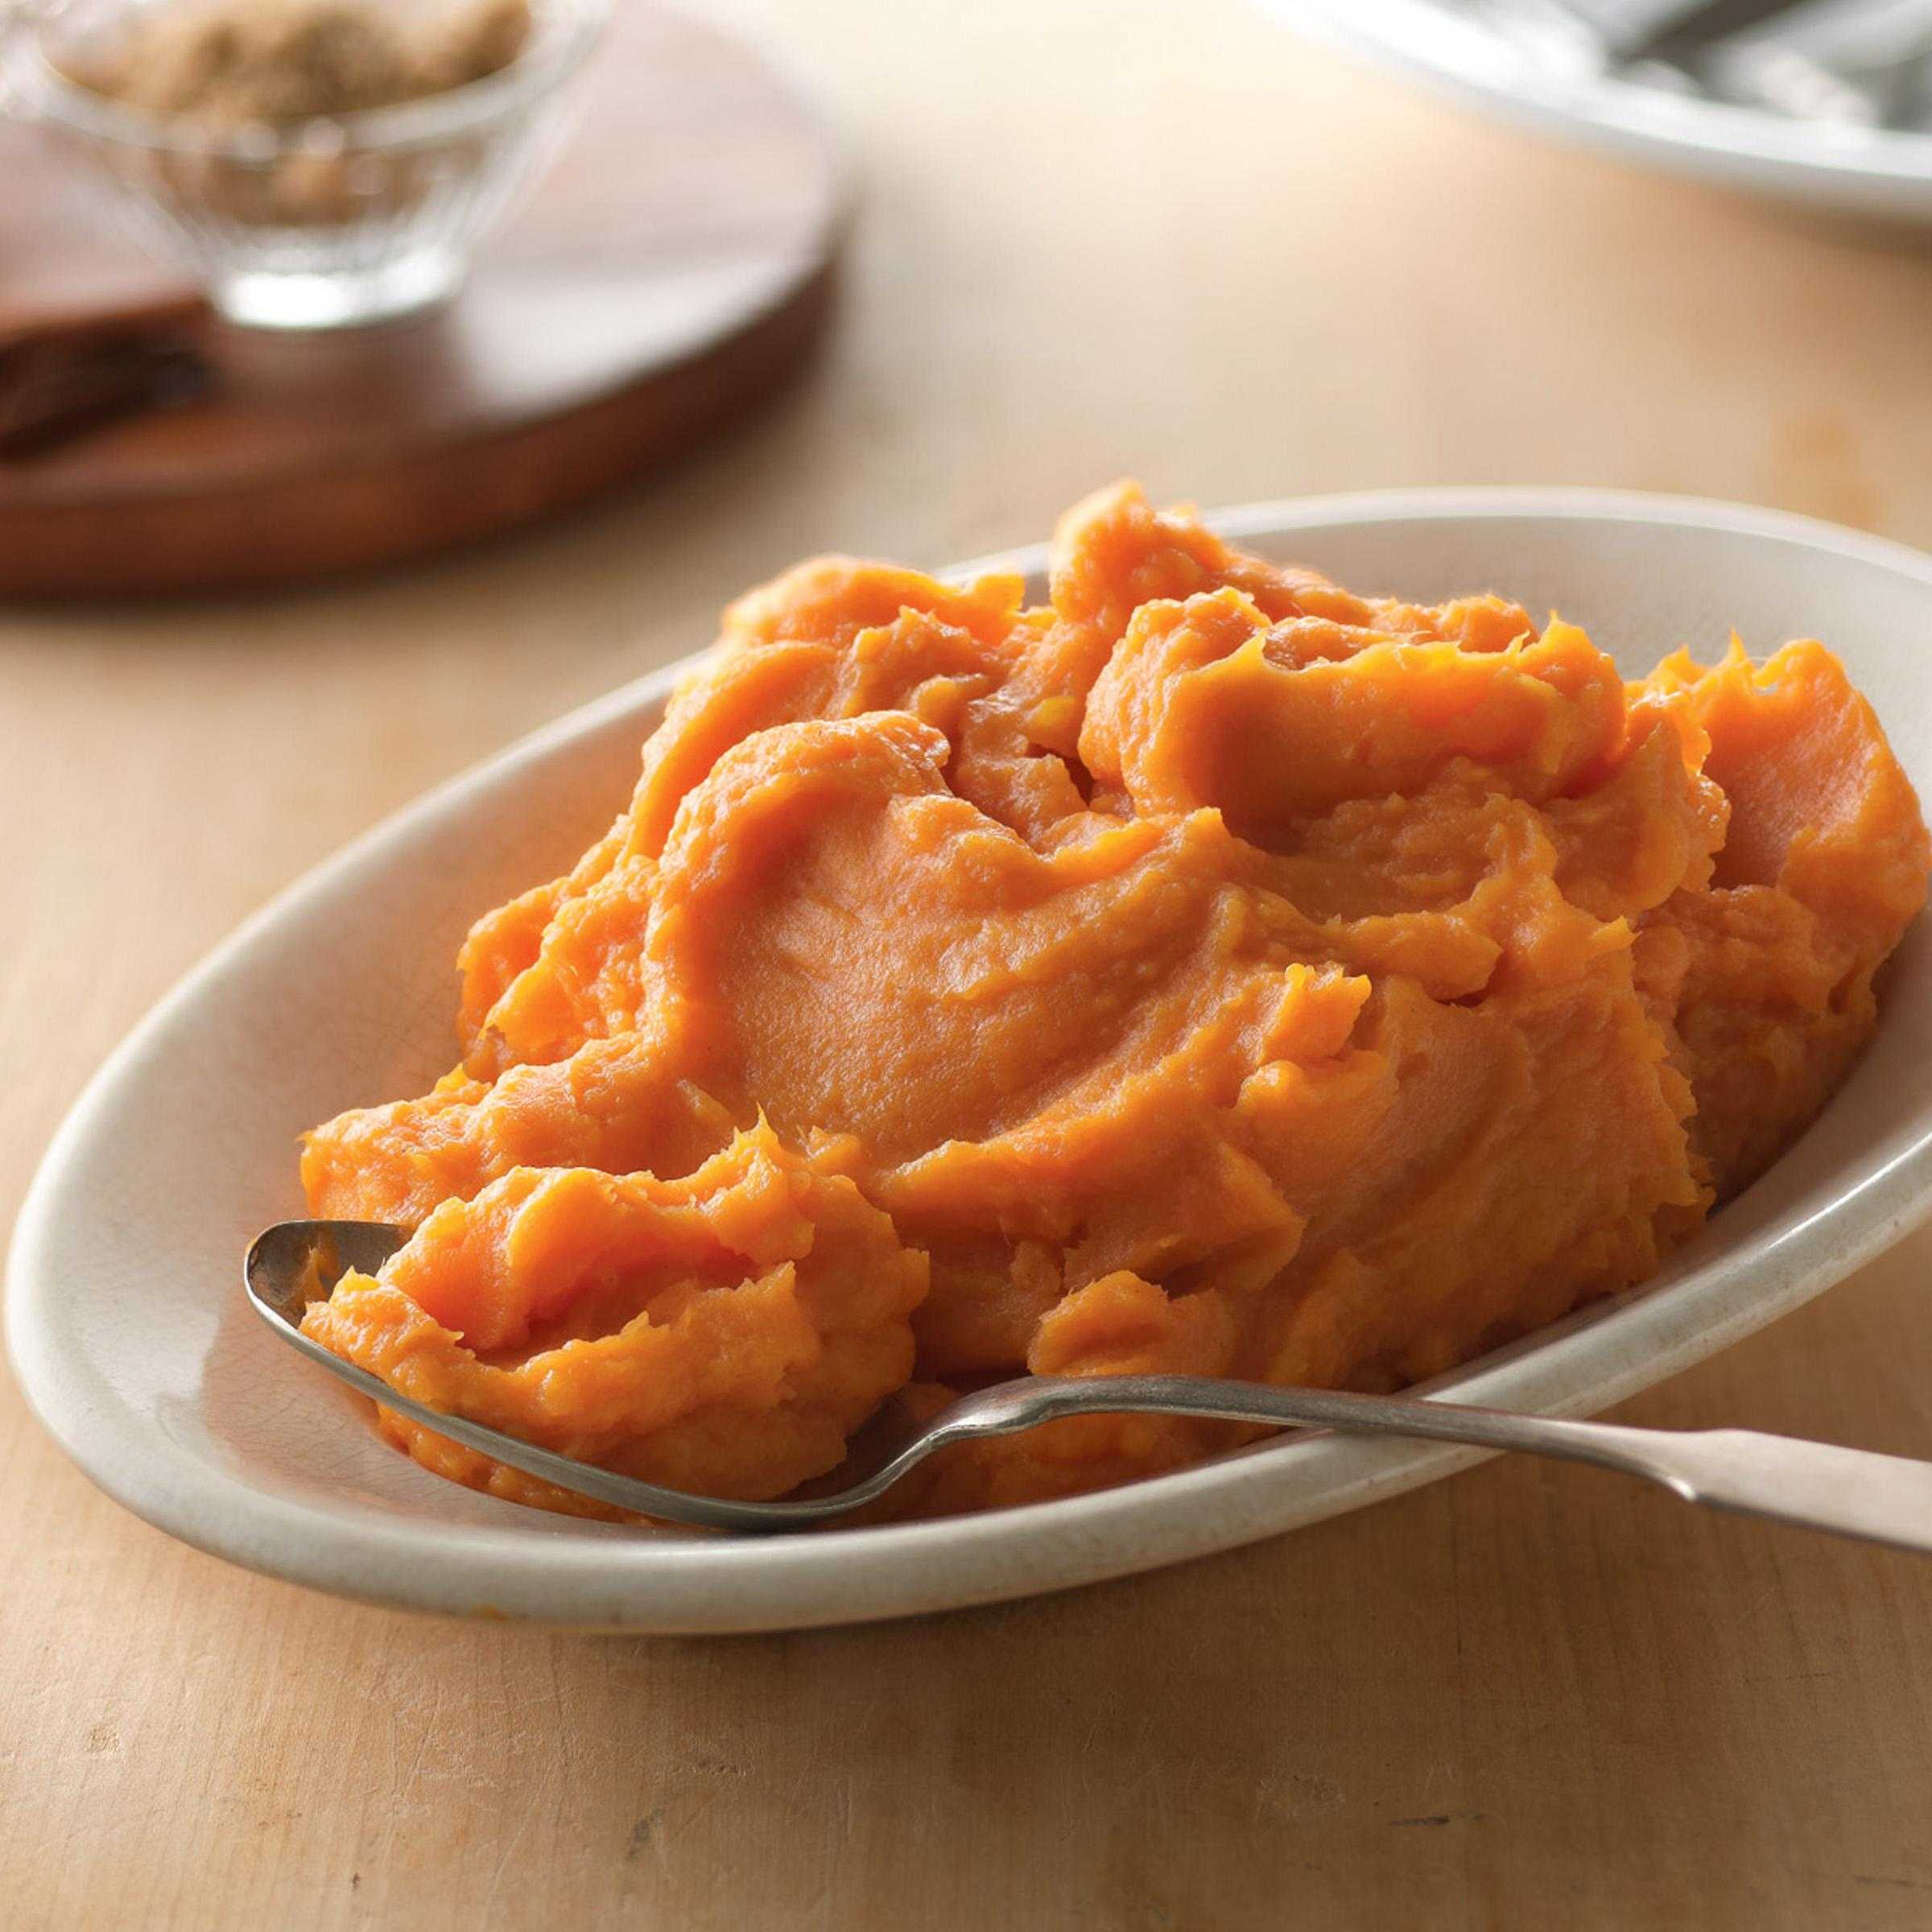 Simply Potatoes® Refrigerated Mashed Sweet Potatoes made with peeled sweet potatoes, 4/6 Lb Bags